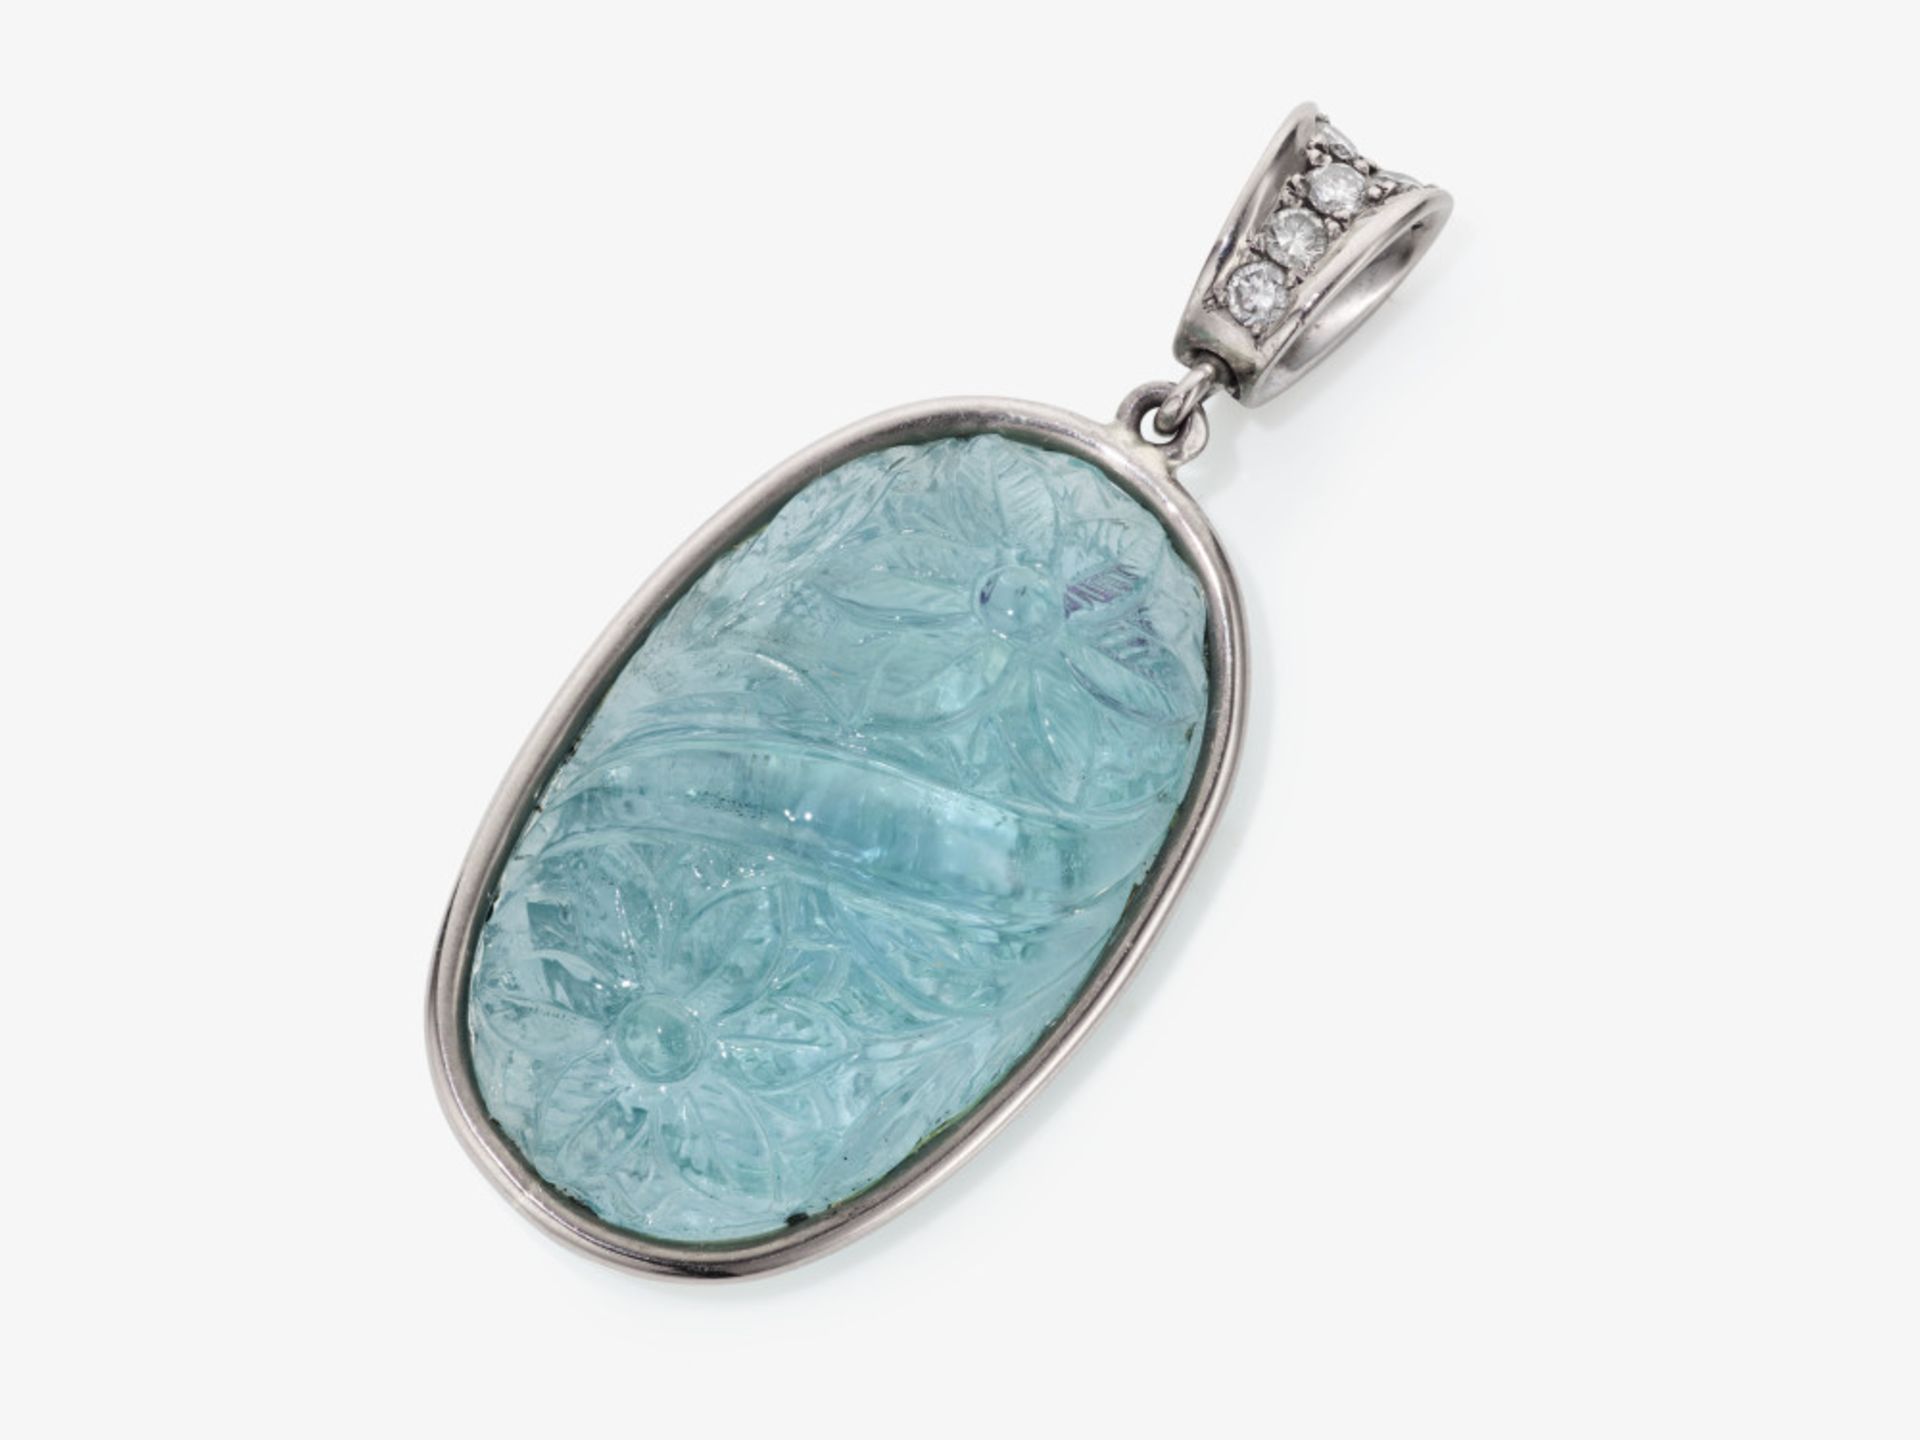 A pendant decorated with an engraved aquamarine in Chinese motifs - Image 2 of 4